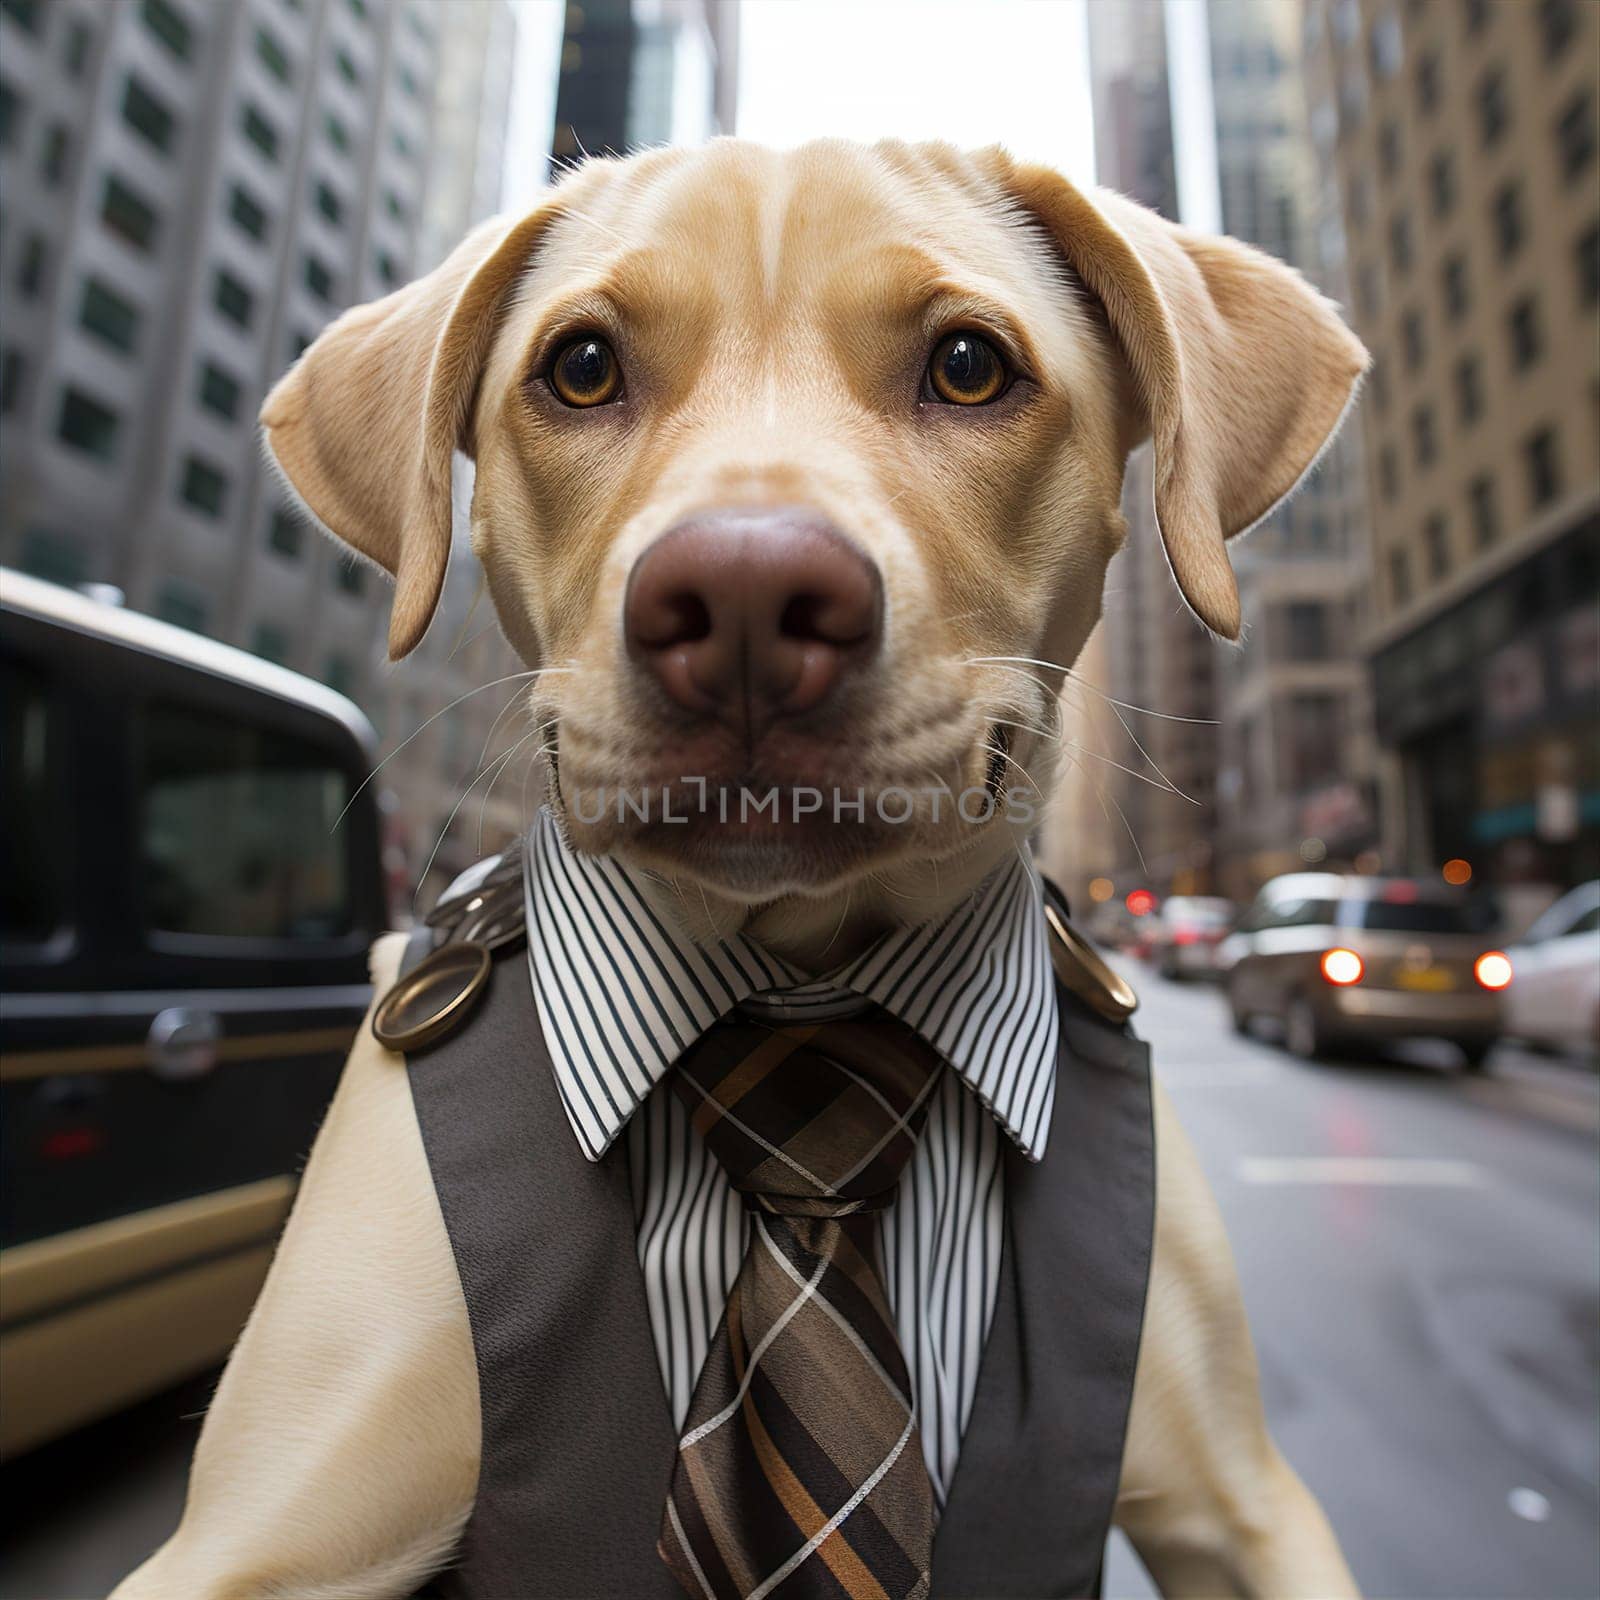 Beautiful elegant dog in business suit with tie in city by kuprevich